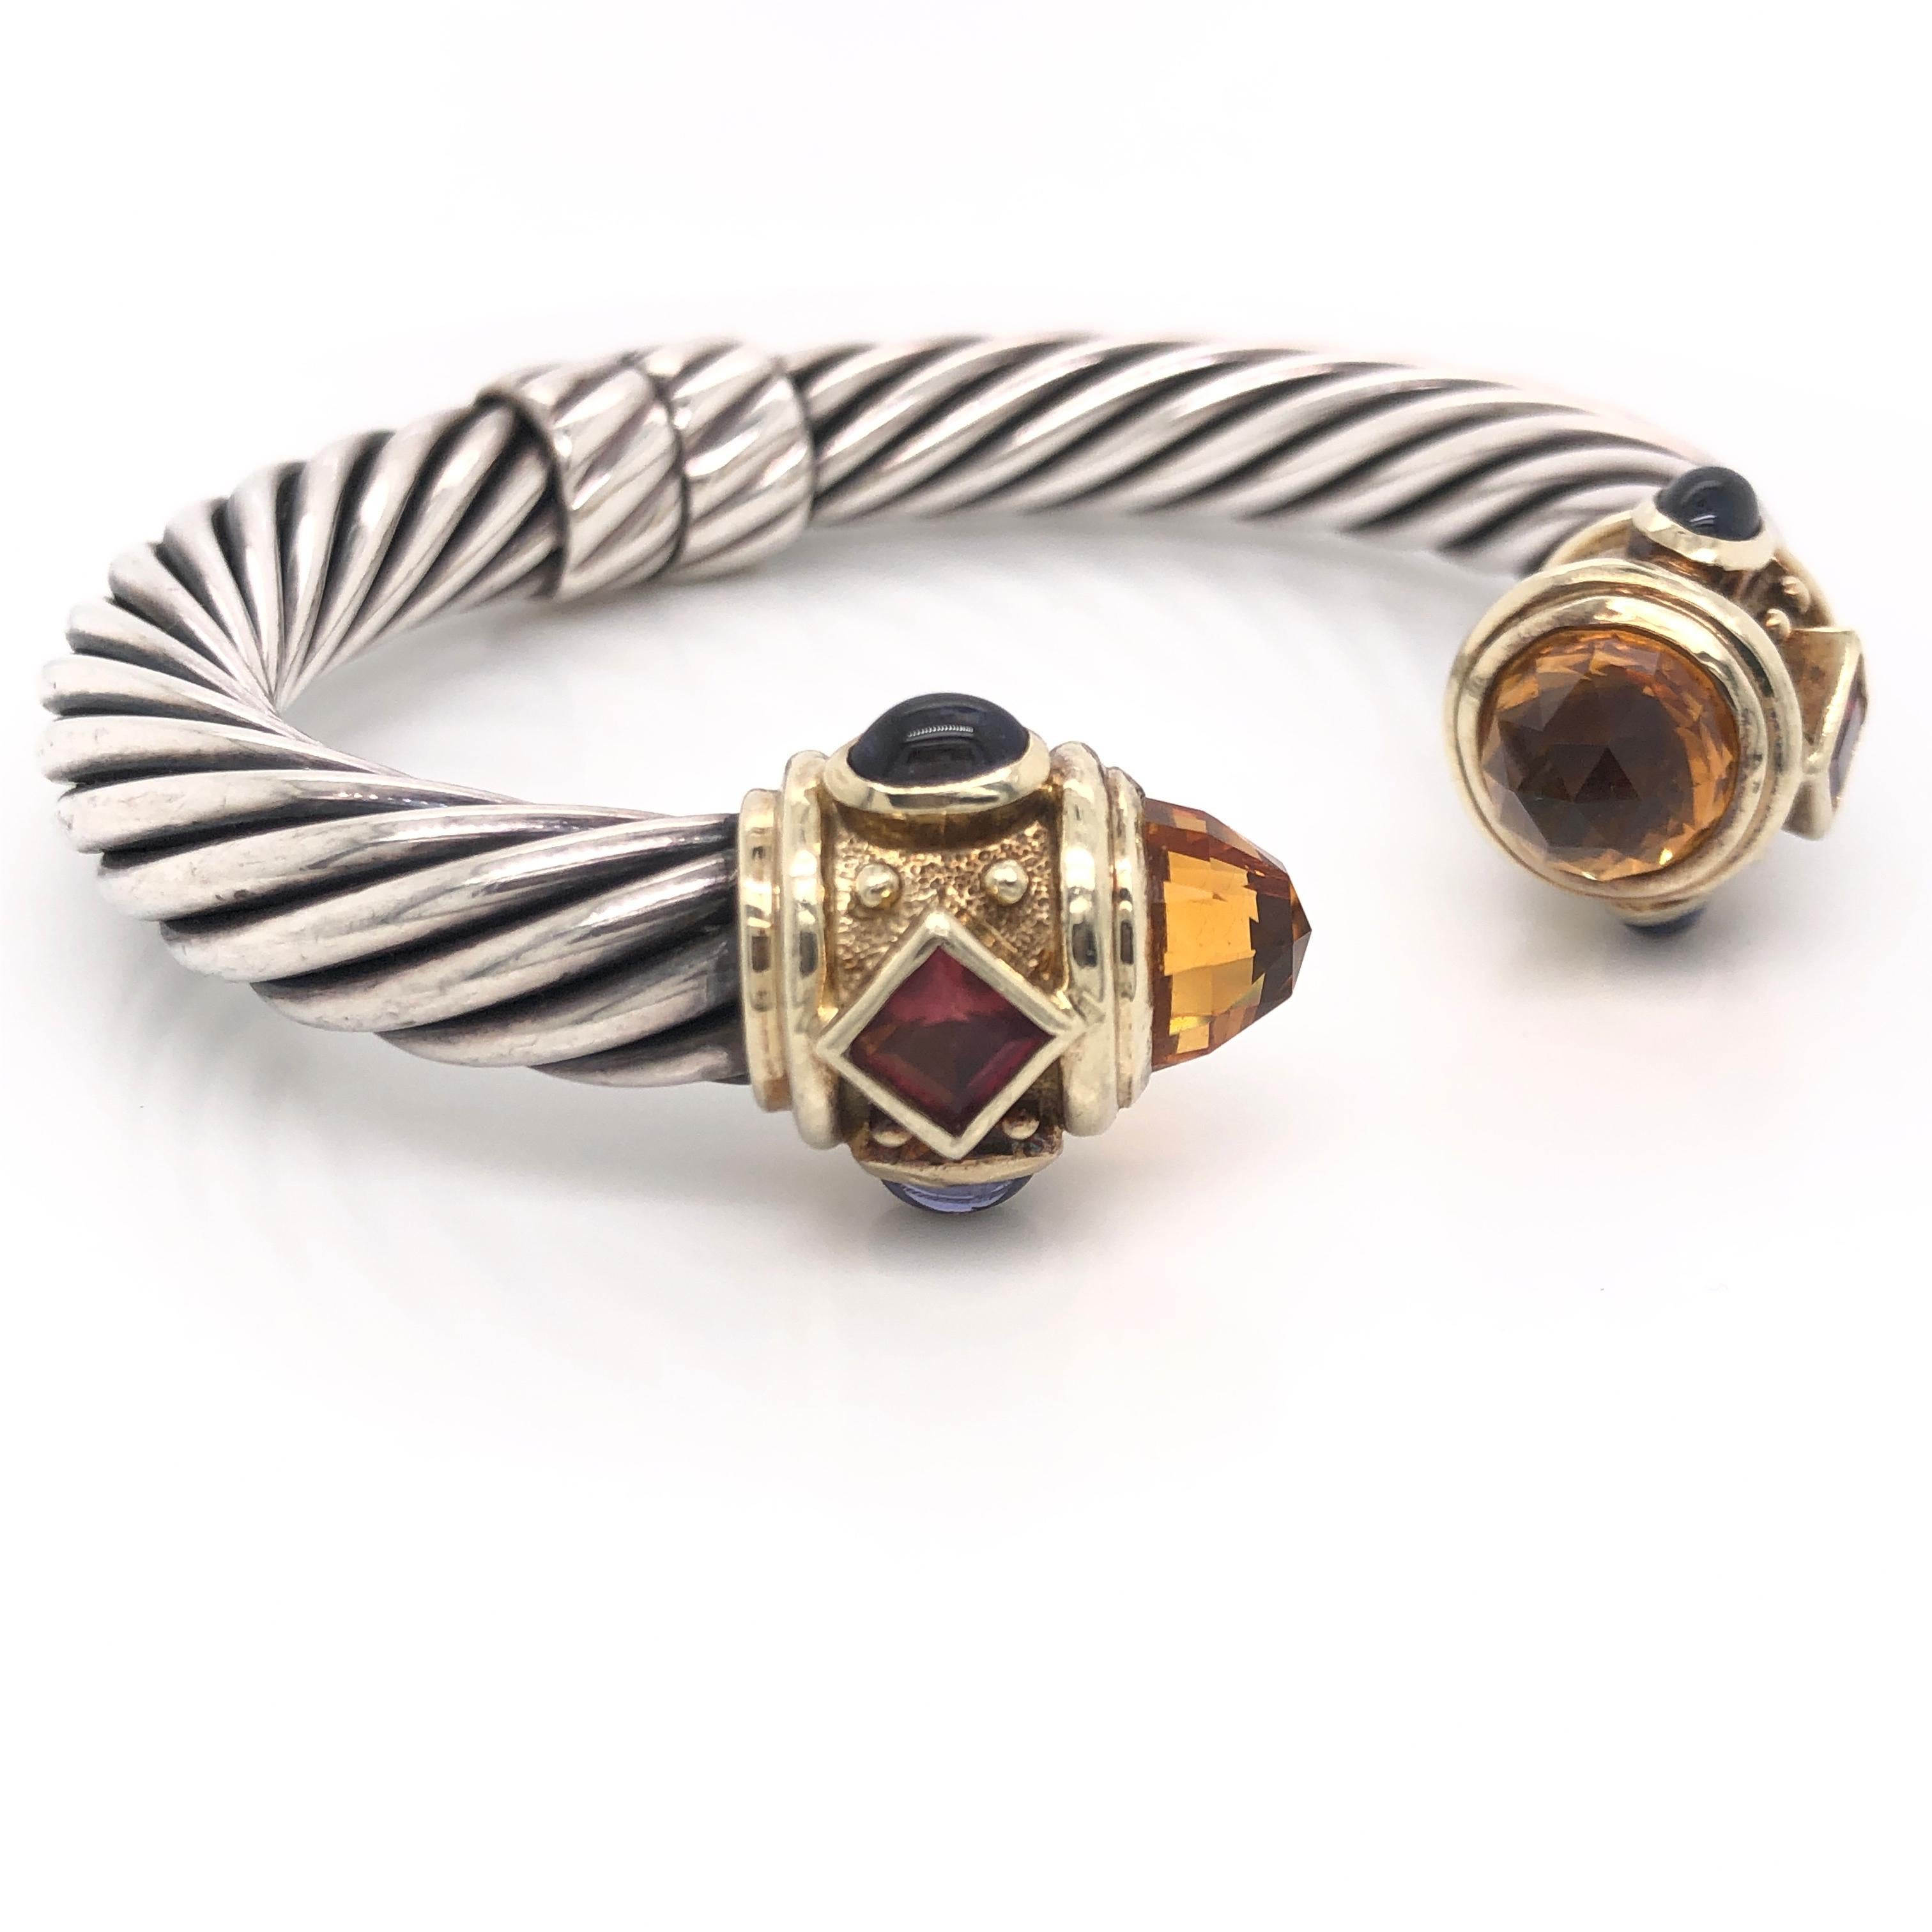 David Yurman Yellow Gold and Sterling Silver Cable Bracelet with Citrine, Amethyst, and Pink Tourmaline.

Stamped: © D YURMAN, 925, 585